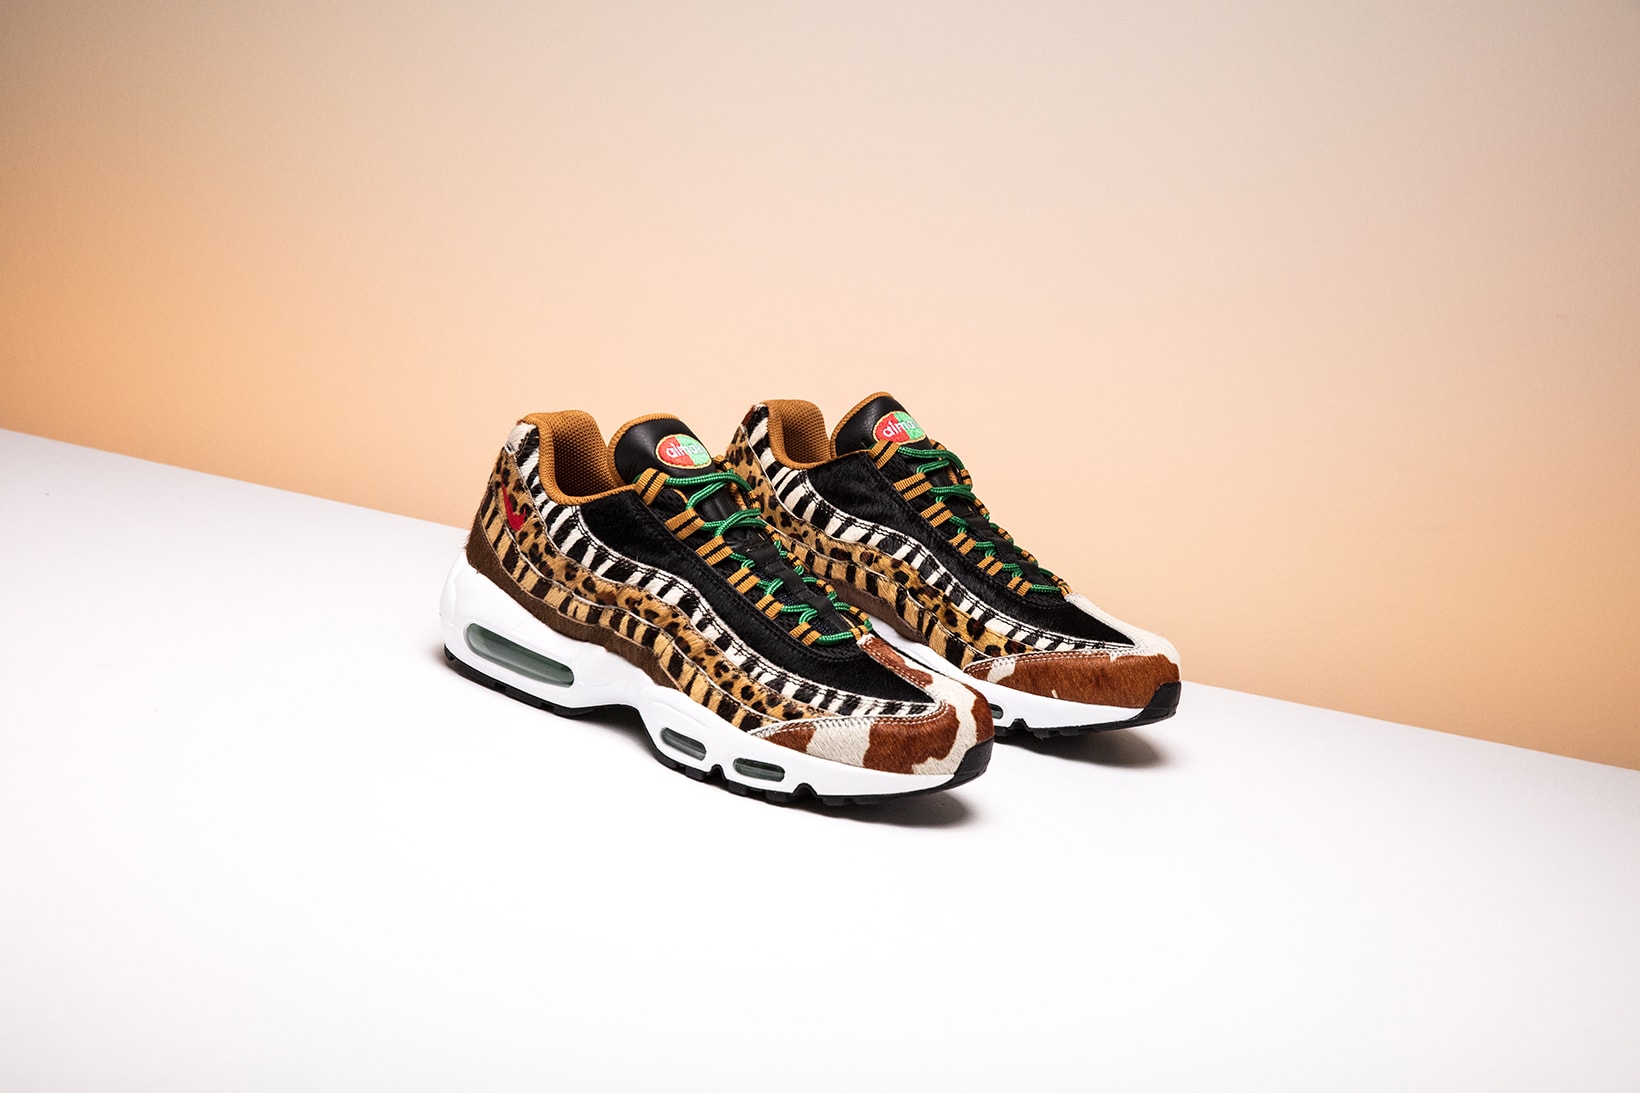 atmos Nike Animal Pack 2 0 closer look Official Release Date info drop march 17 2018 sneakers shoes footwear